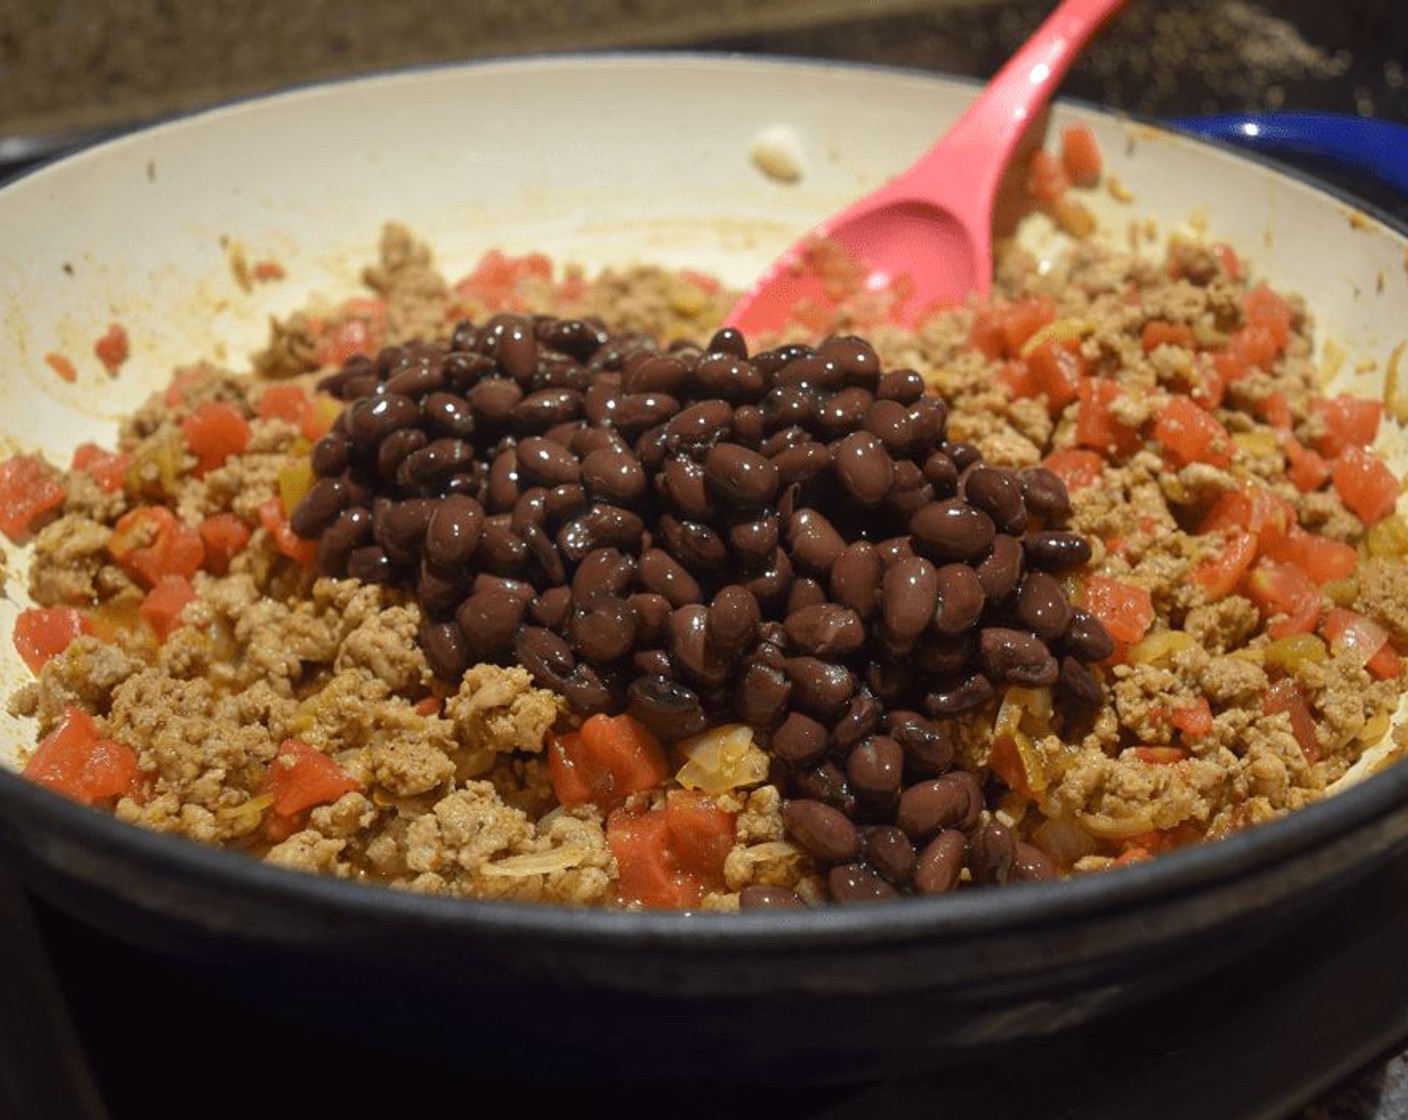 step 7 Stir in Diced Tomatoes with Green Chilies (1 can) and Black Beans (1 can), then stir in the quinoa. Remove from the heat, and then stir in half of the Monterey Jack Cheese (1/2 block).